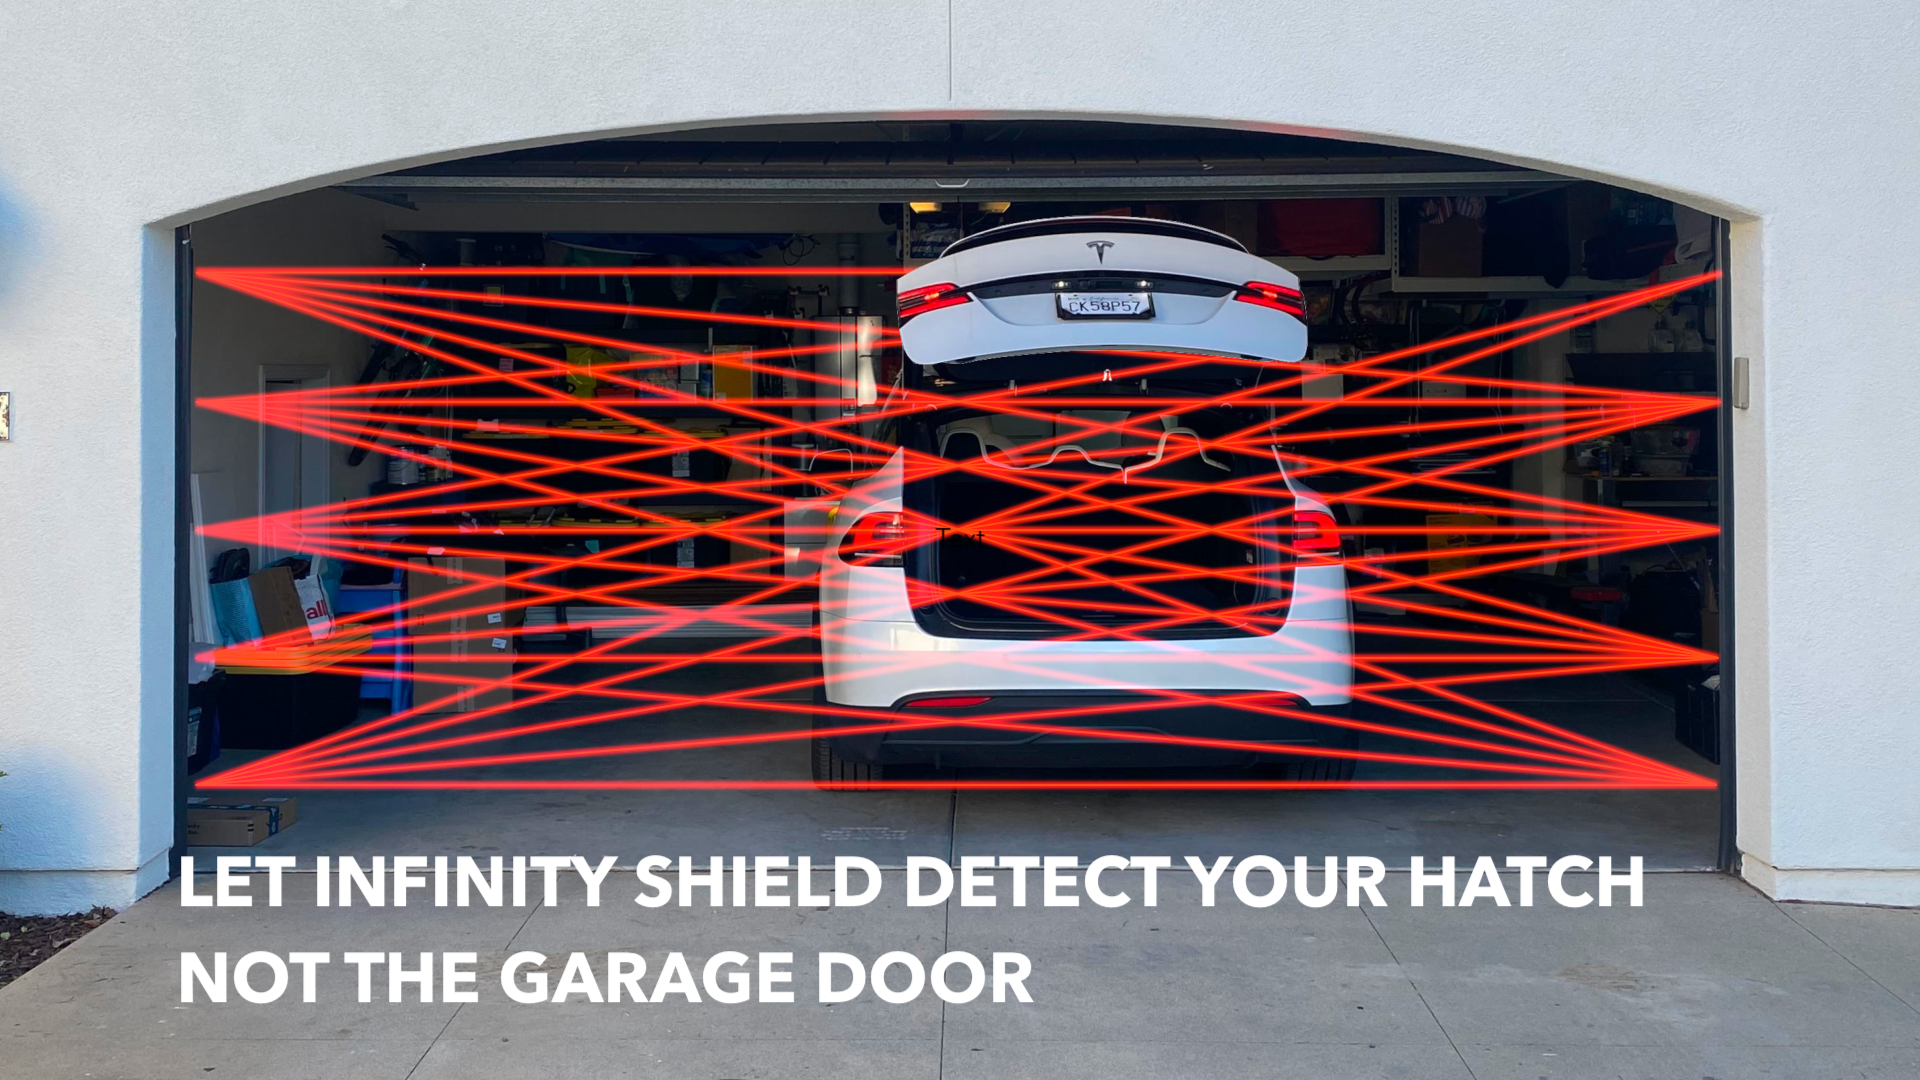 Don't let your truck get accidentally crushed. Infinity Shield is smart and will prevent your door operating while there is something in the path.